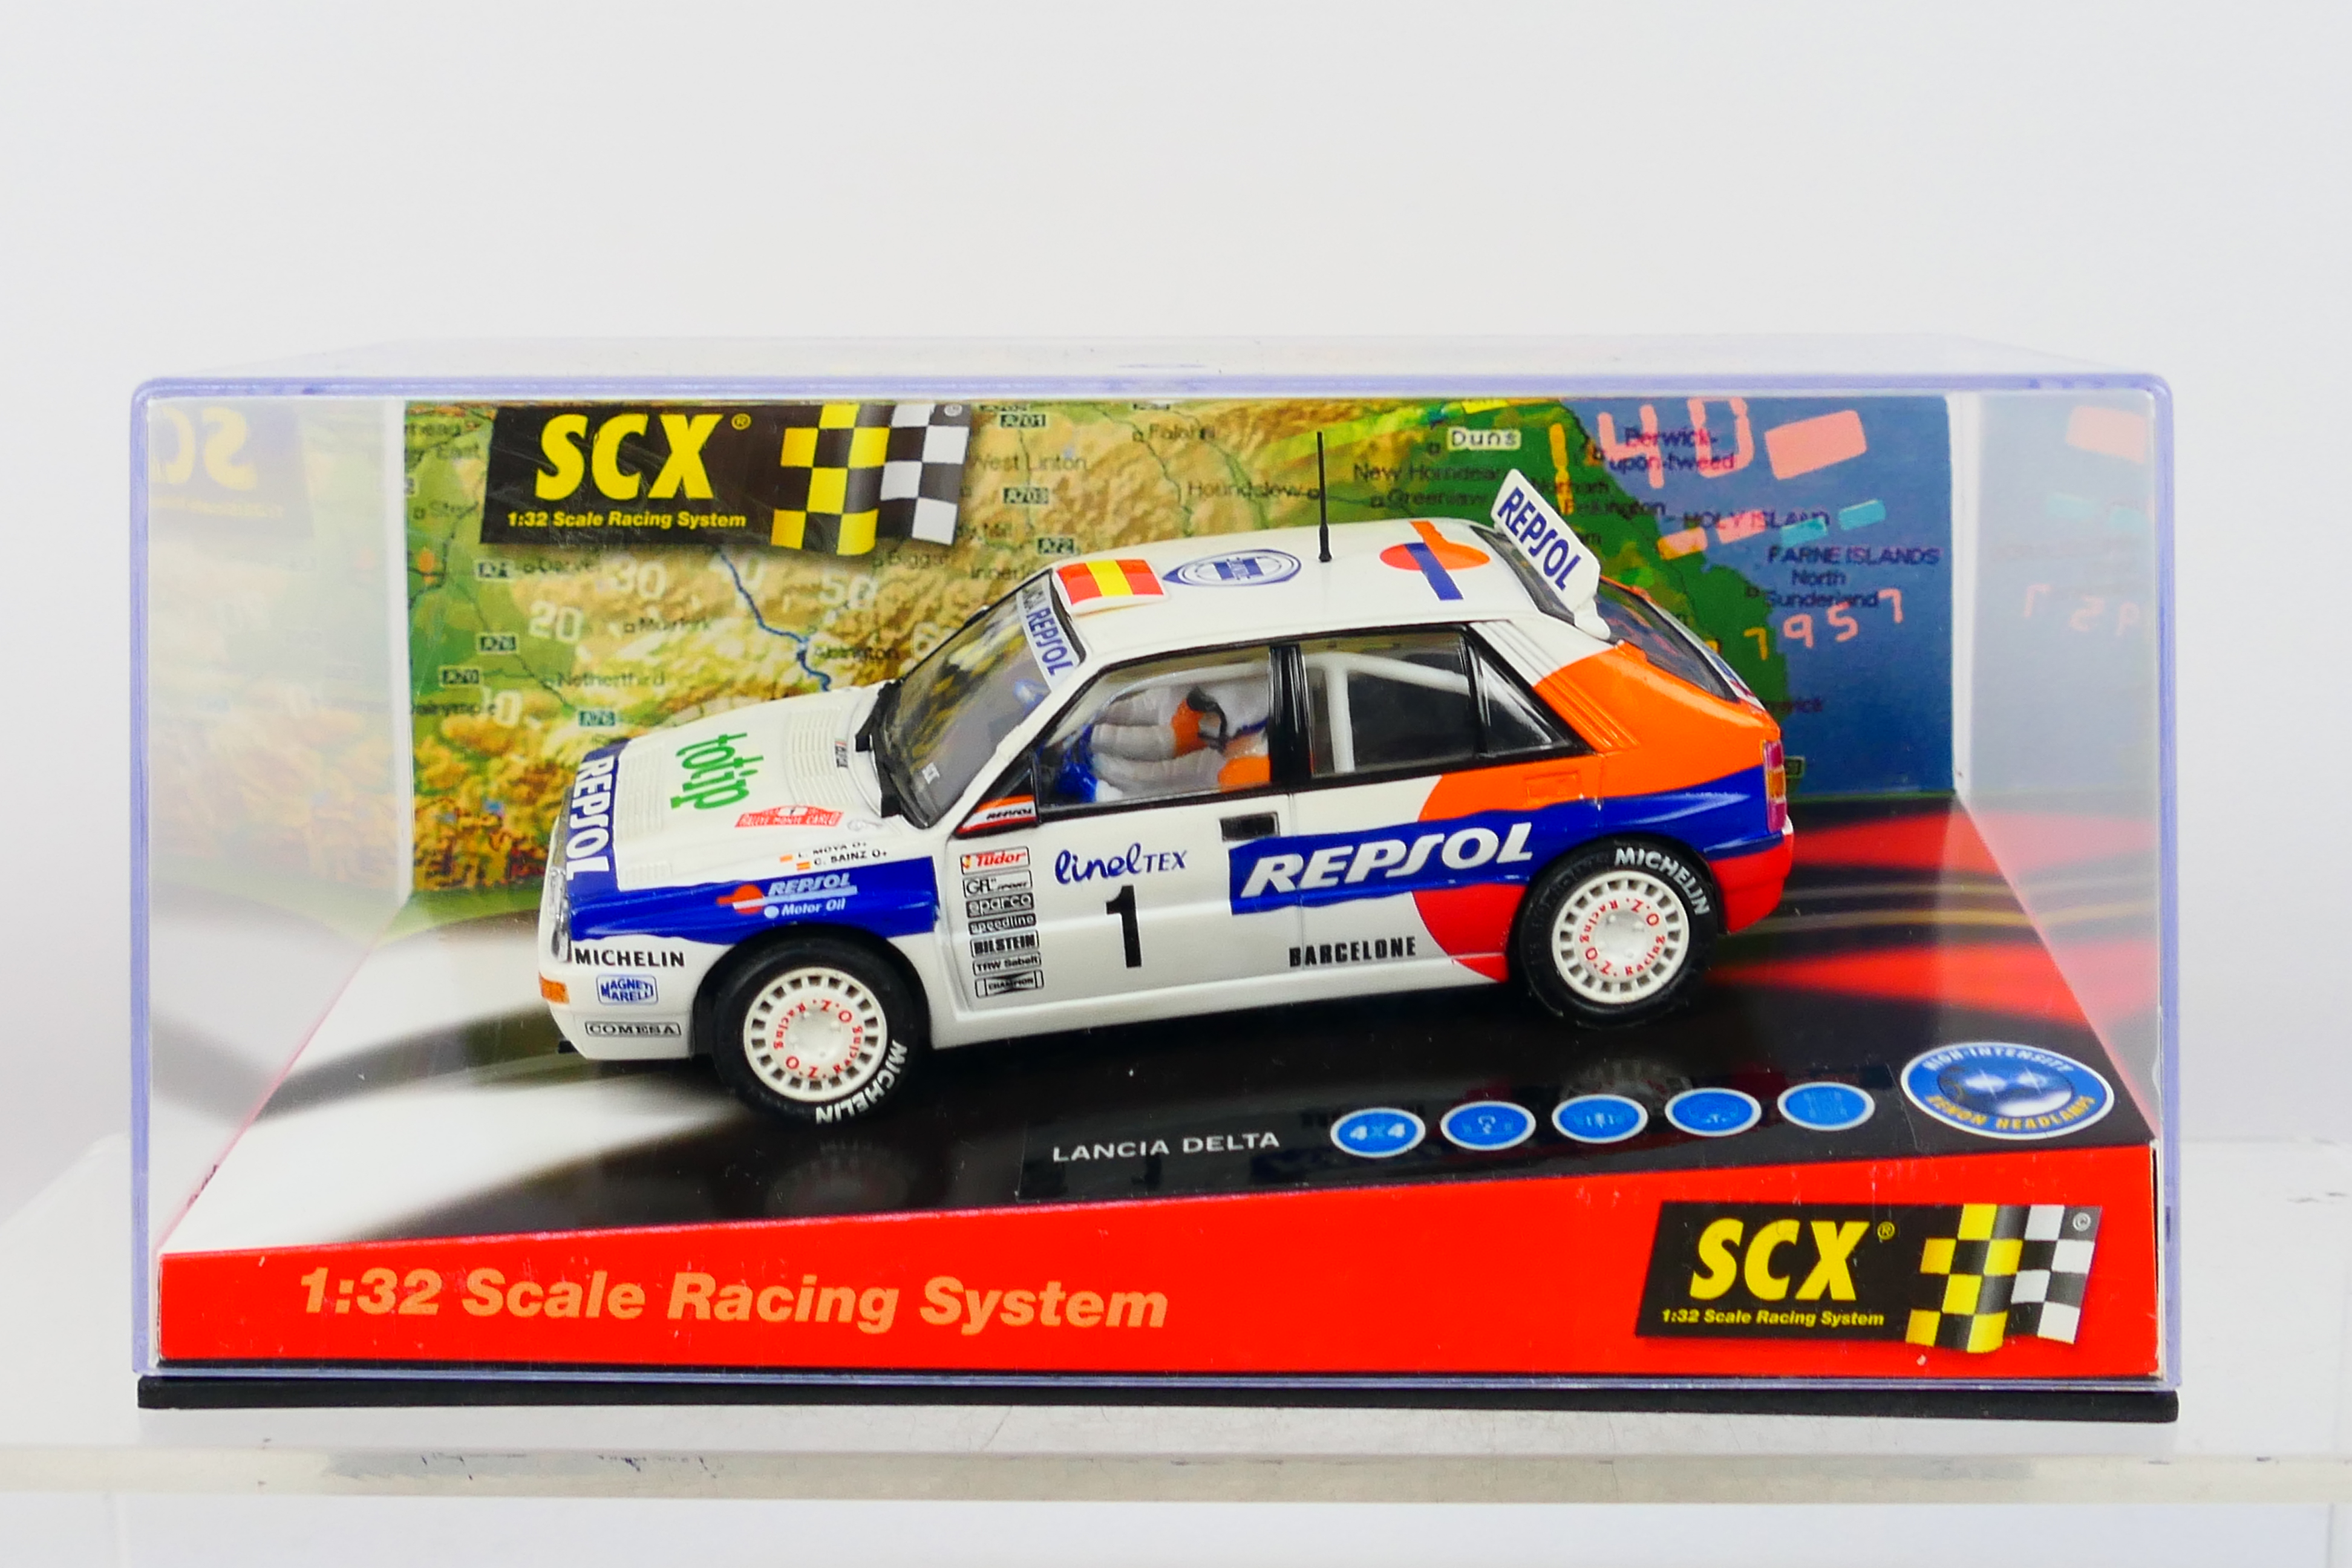 SCX - Fly - Two boxed 1:32 scale Lancia slot cars. - Image 3 of 4